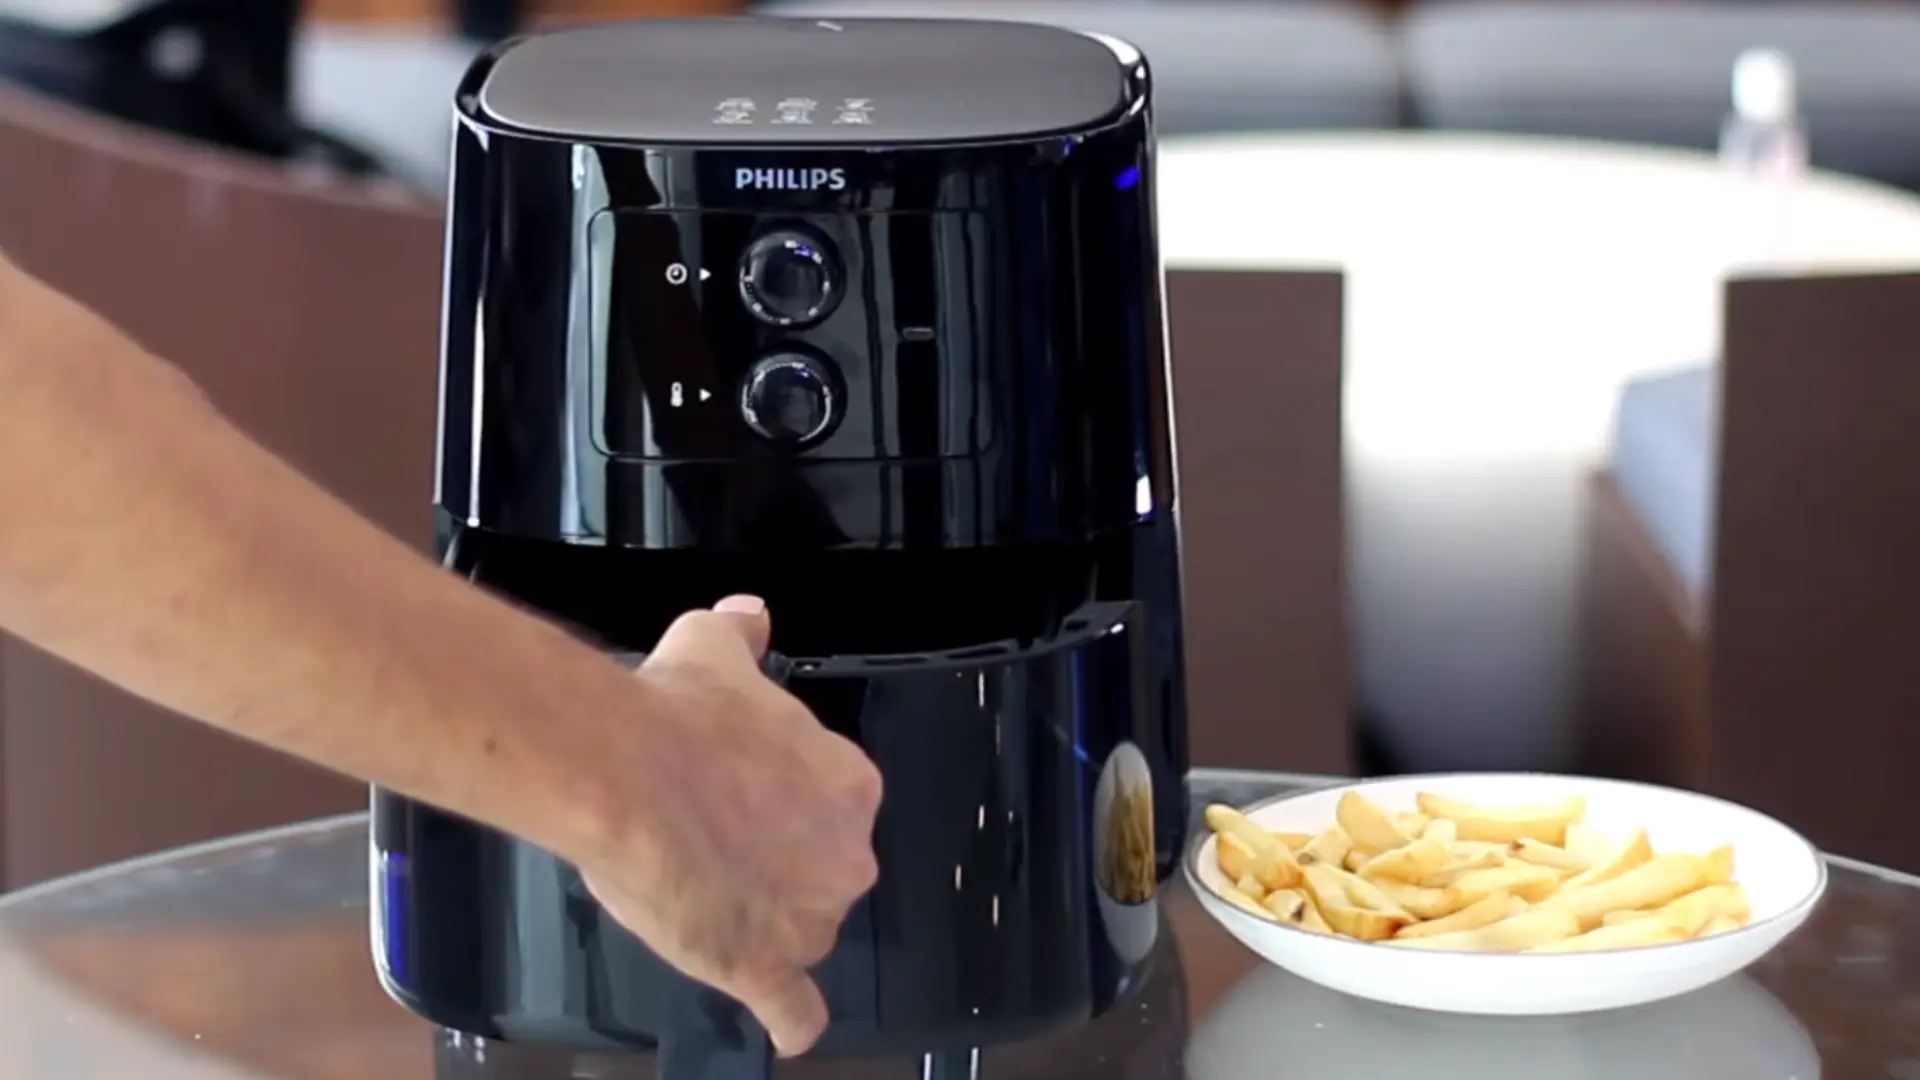 How To Cook Frozen French Fries In An Air Fryer